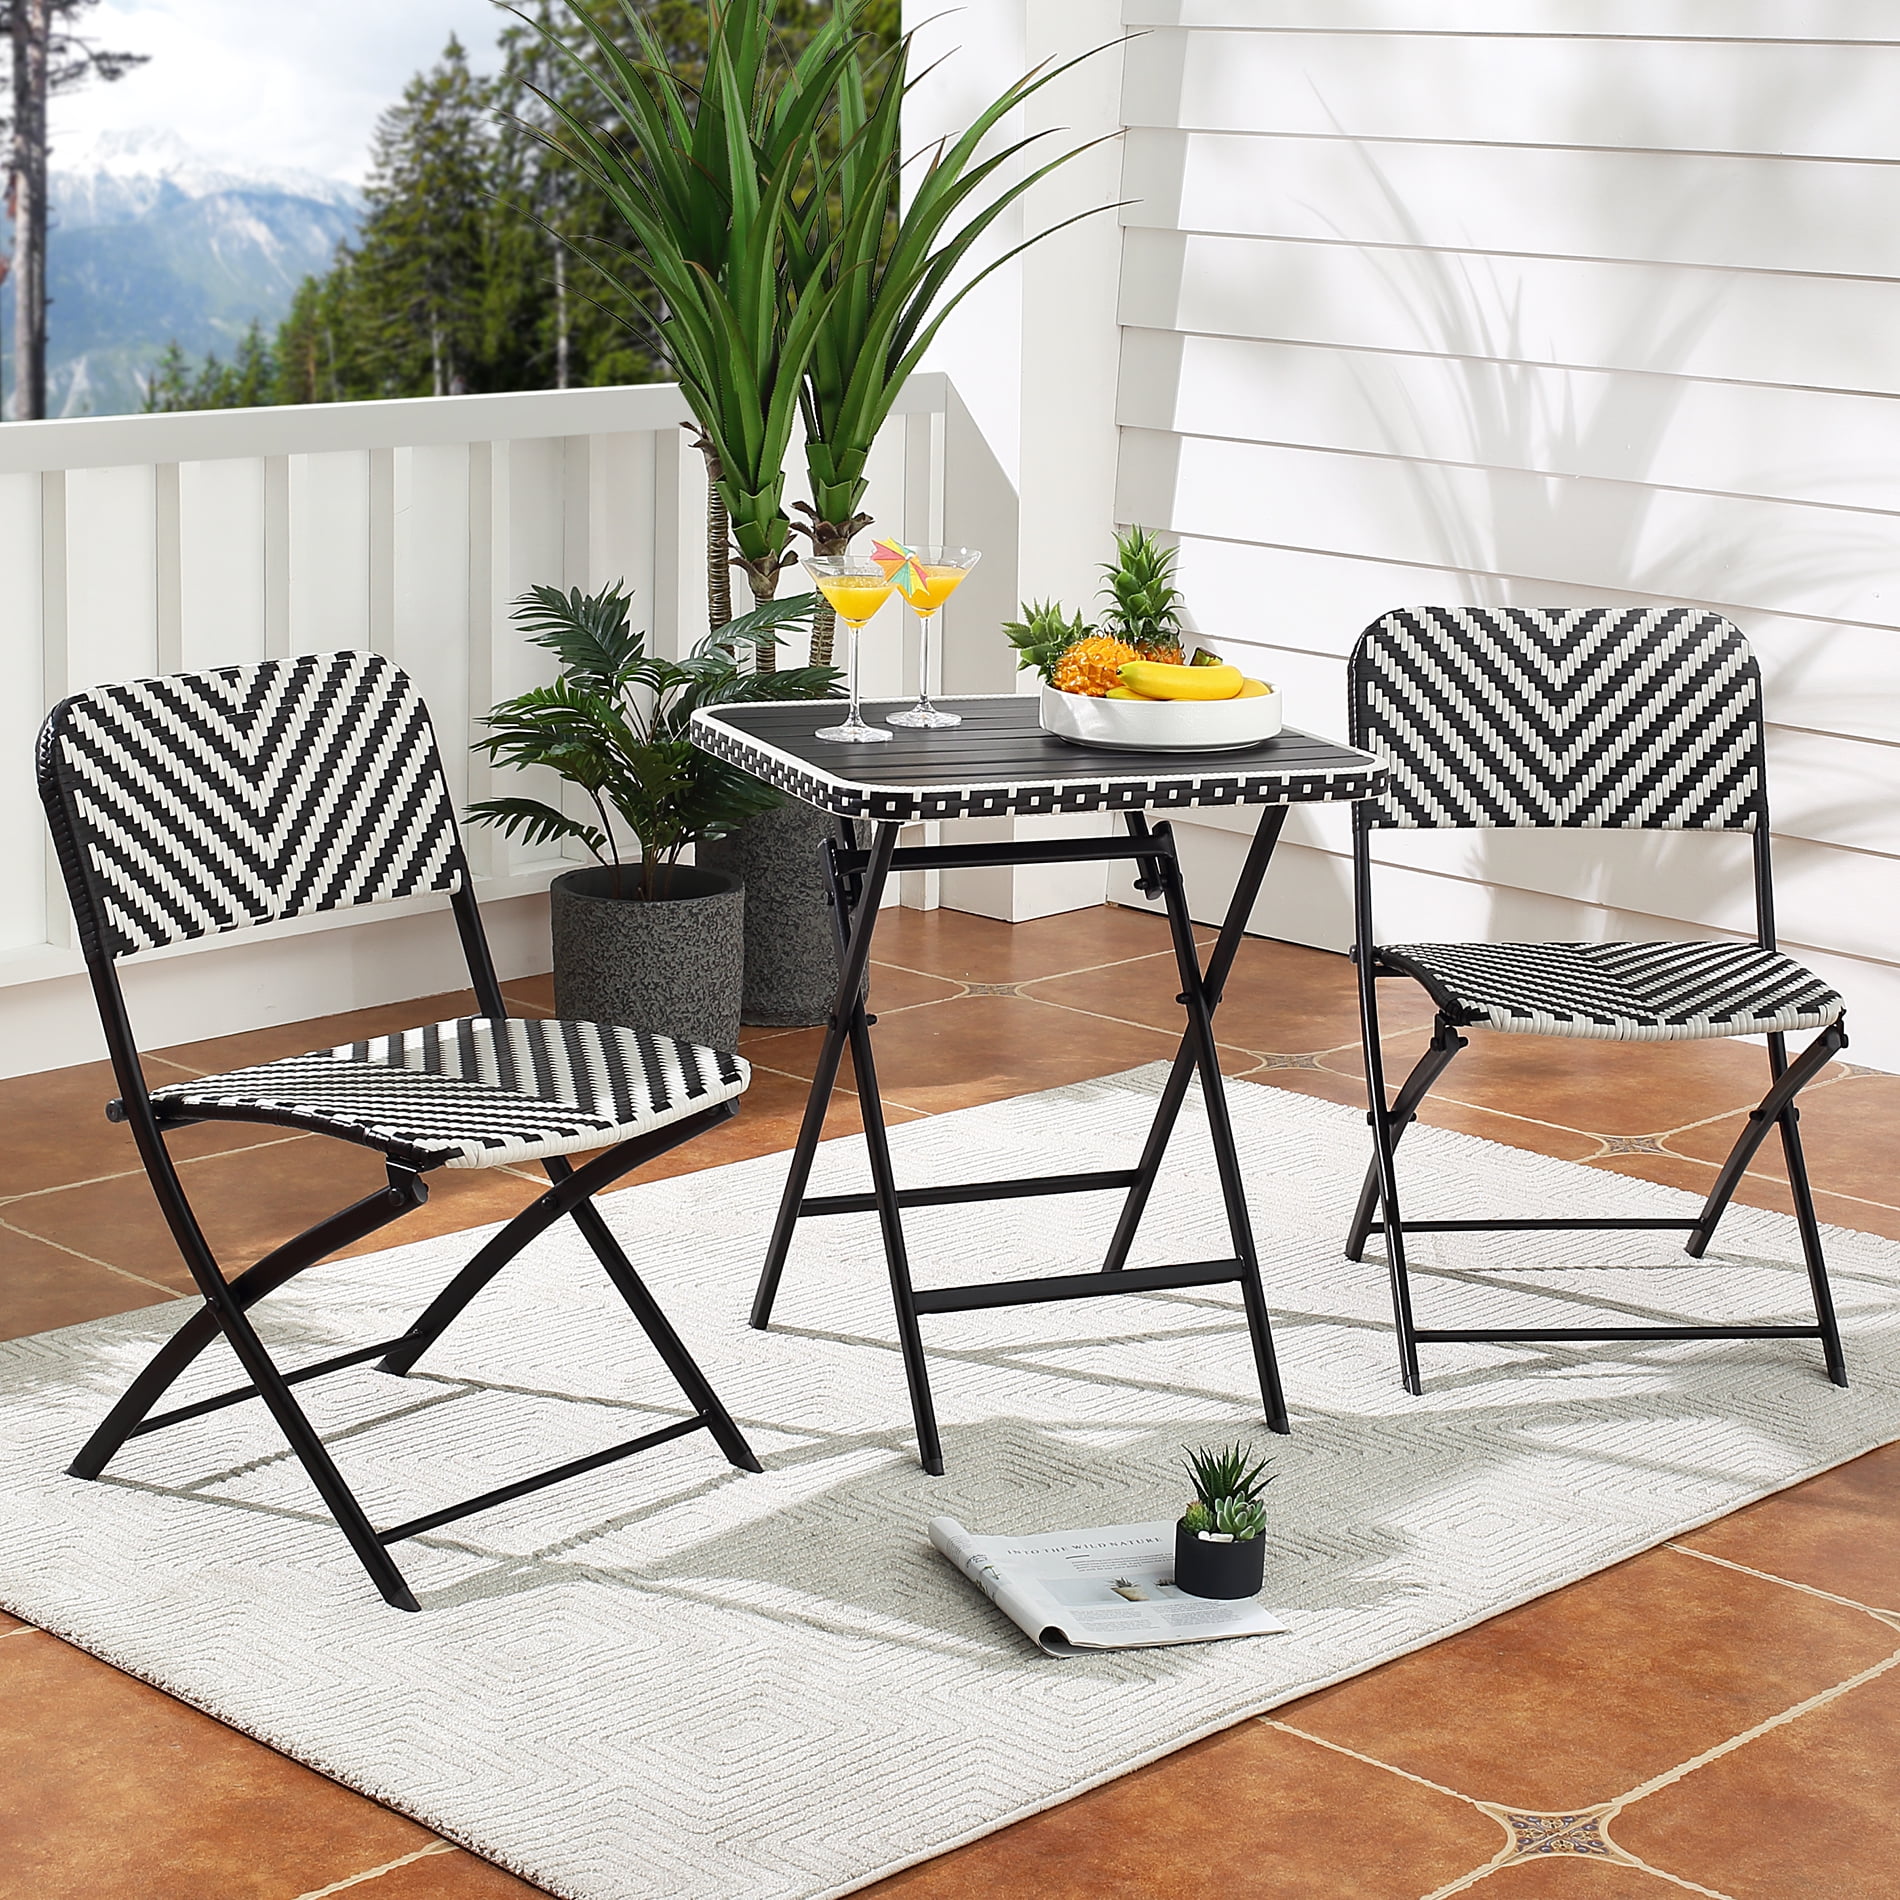 Image of Foldable bistro set for small patio